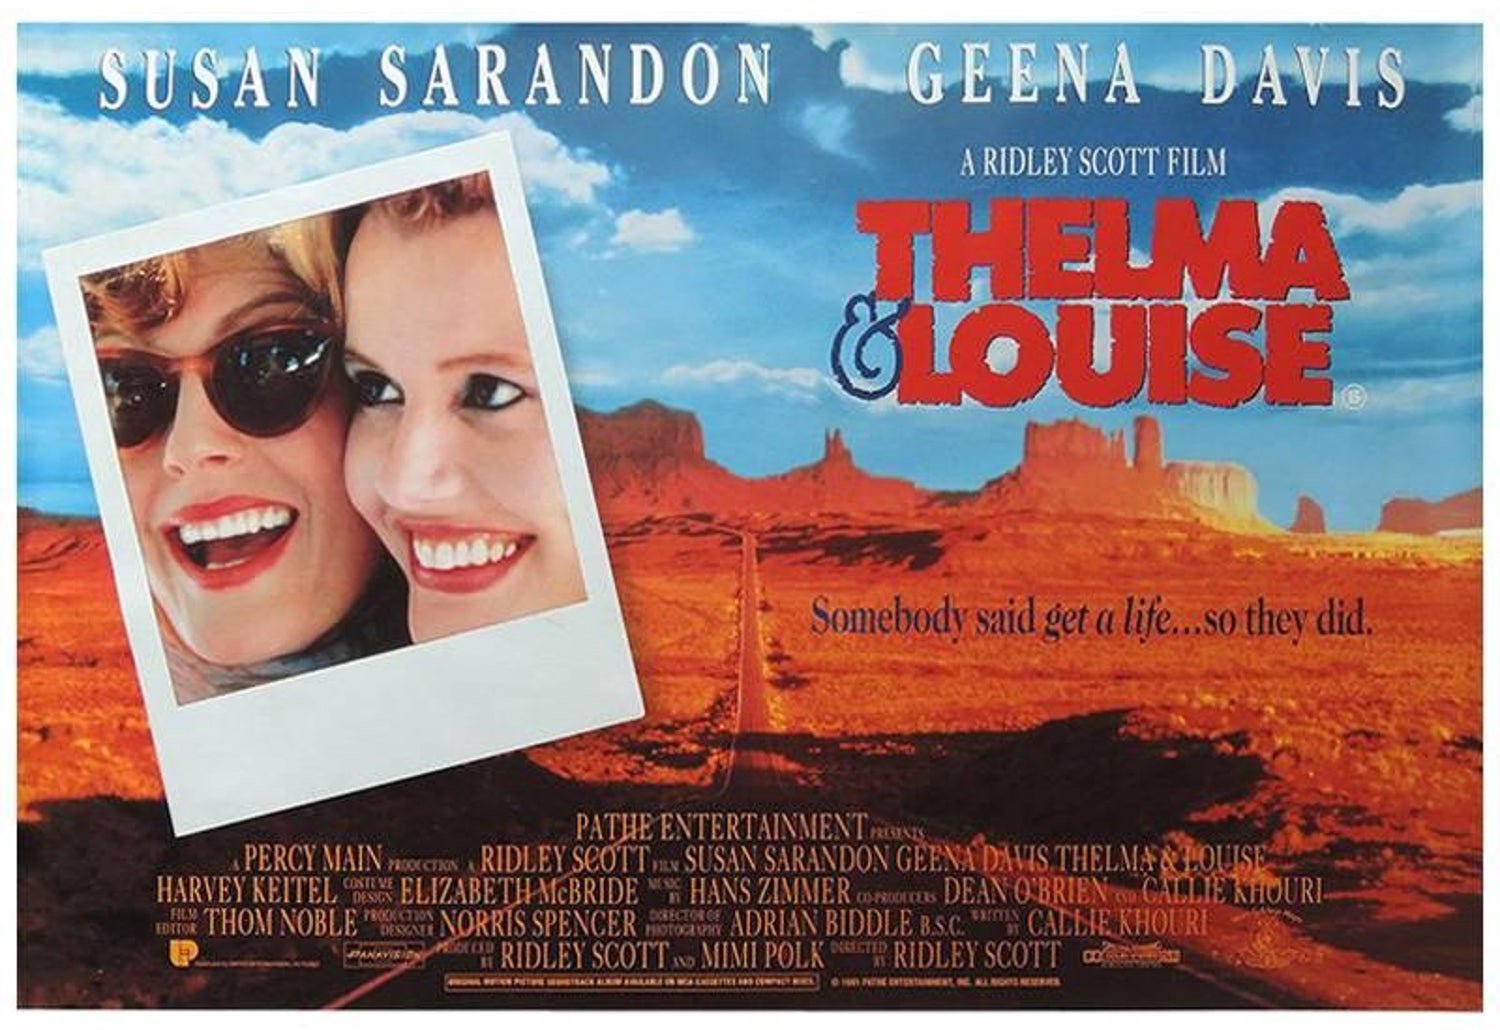 Thelma and Louise Movie Review